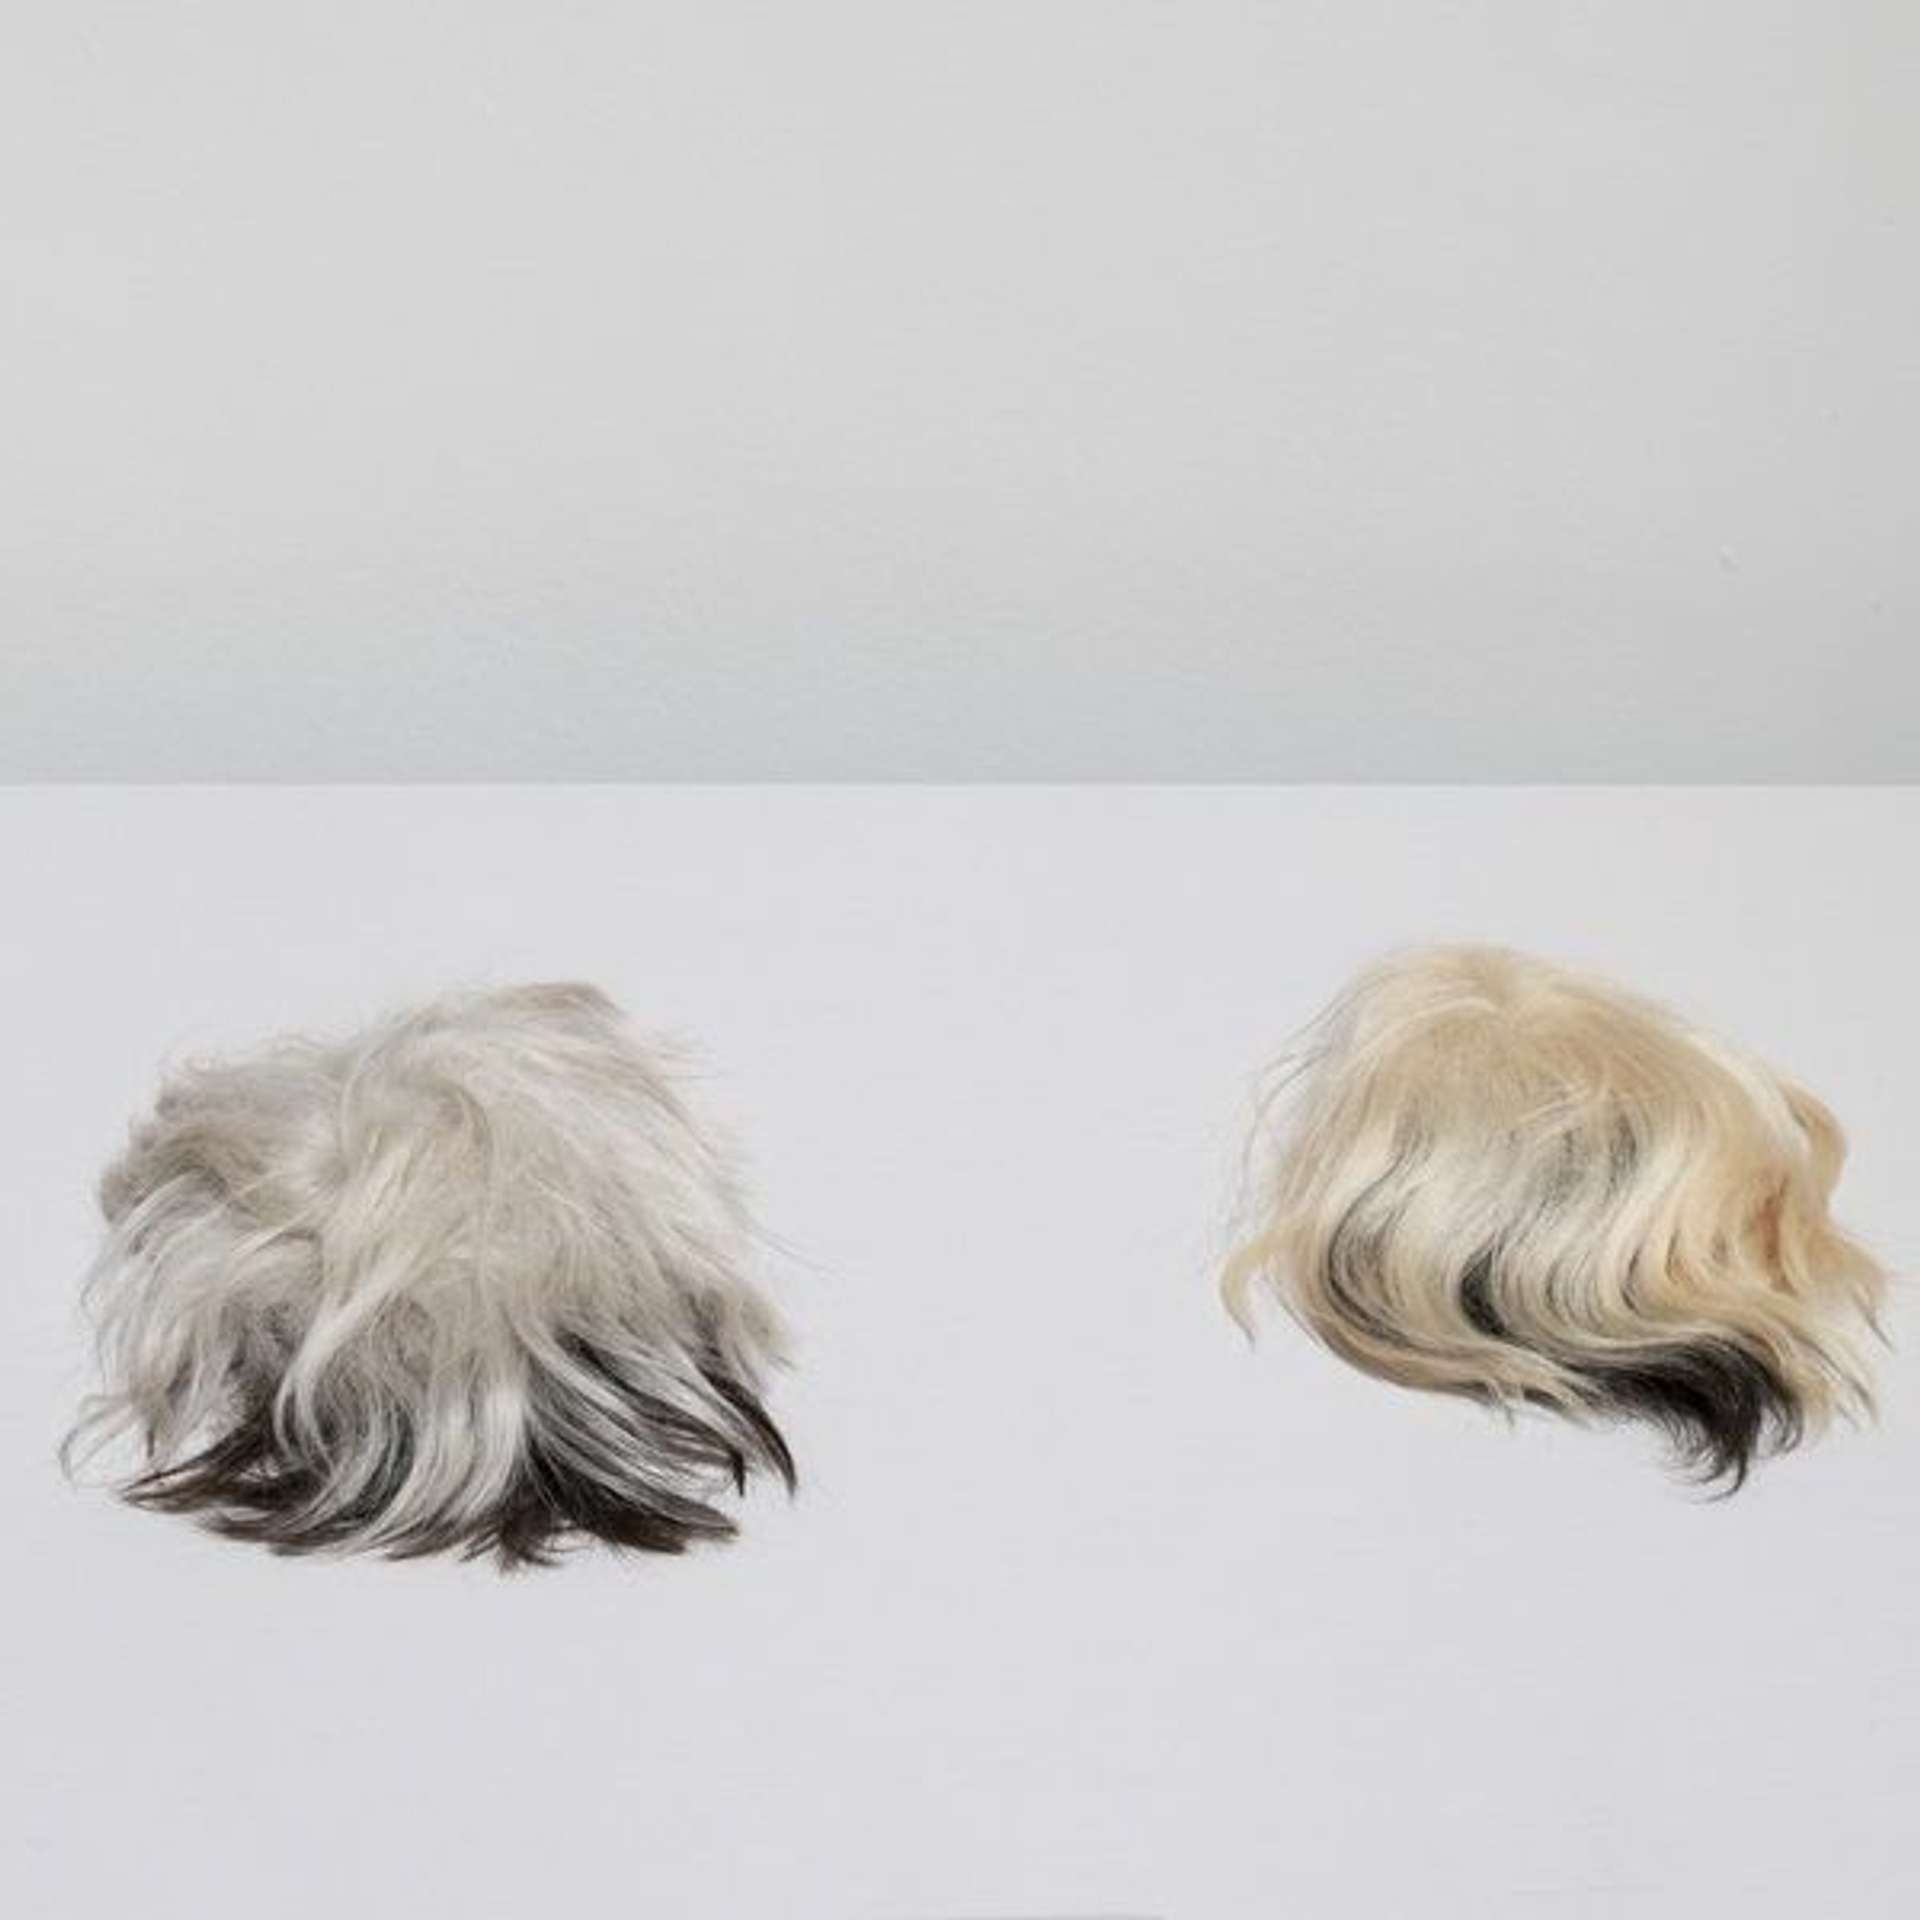 Wigs by Andrew Dunkley, Tate photography